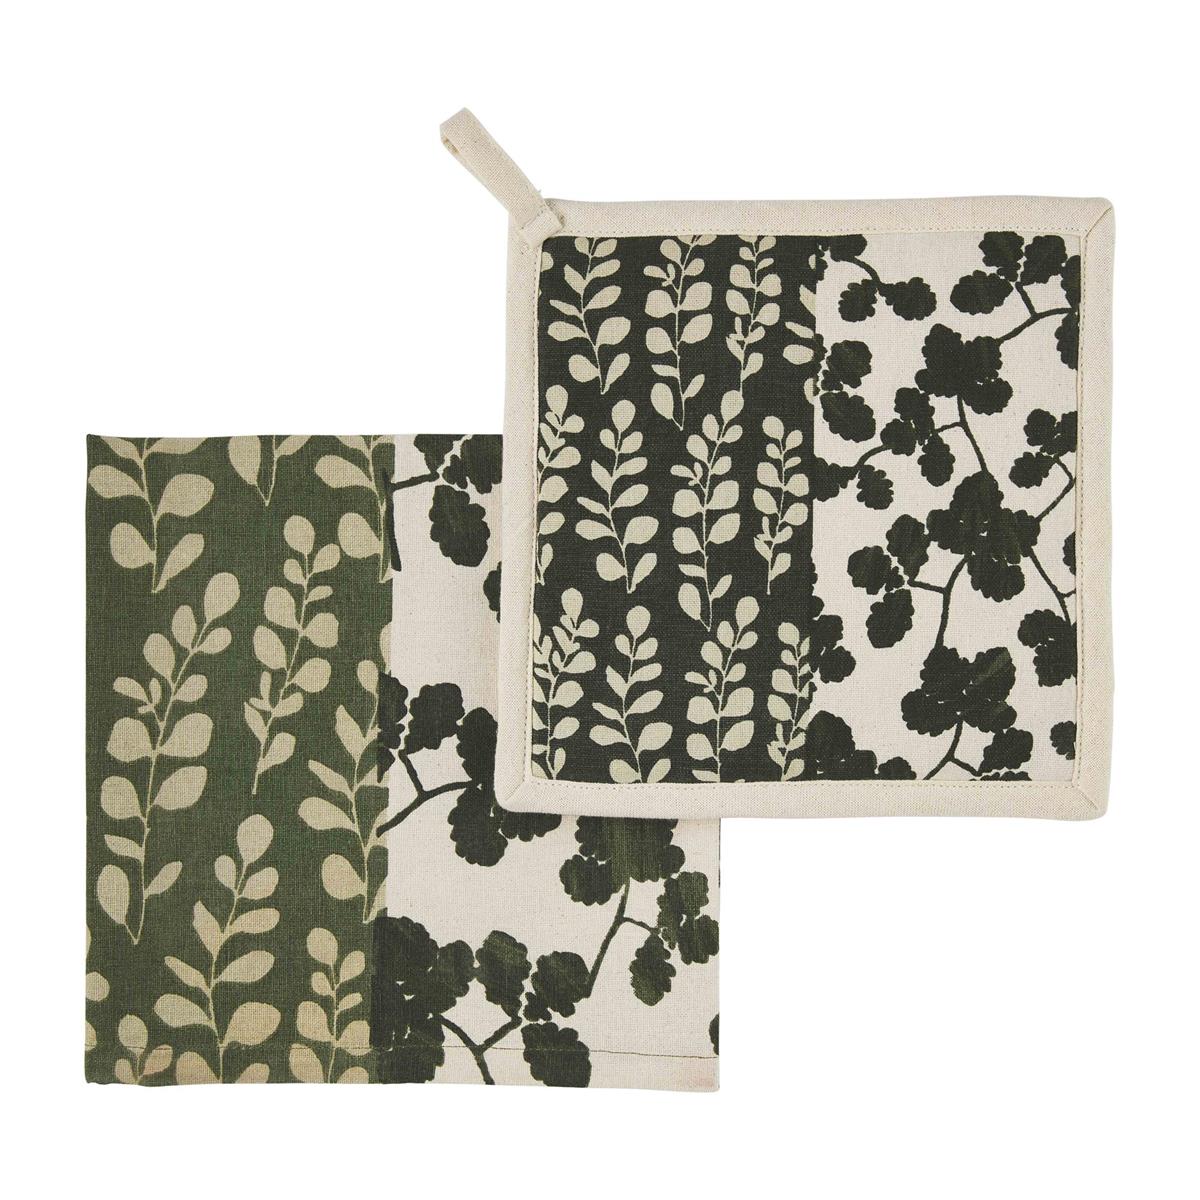 green and cream dishtowel and potholer with leaf design.